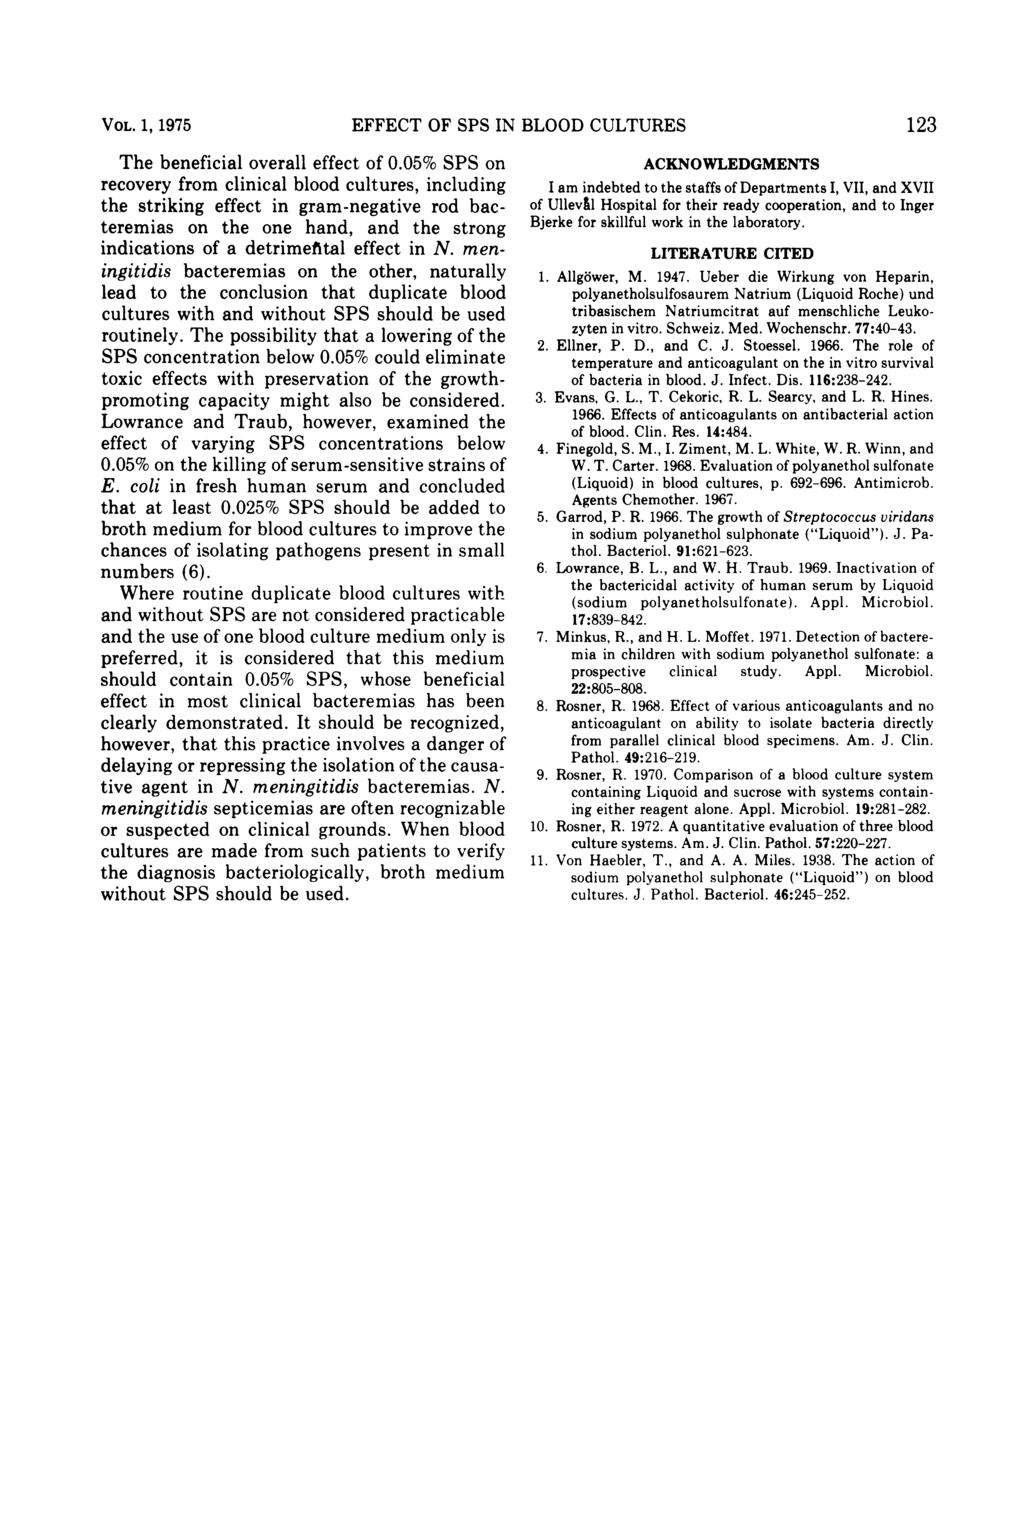 VOL. 1, 1975 EFFECT OF SPS IN BLOOD CULTURES The beneficil overll effect of 0.